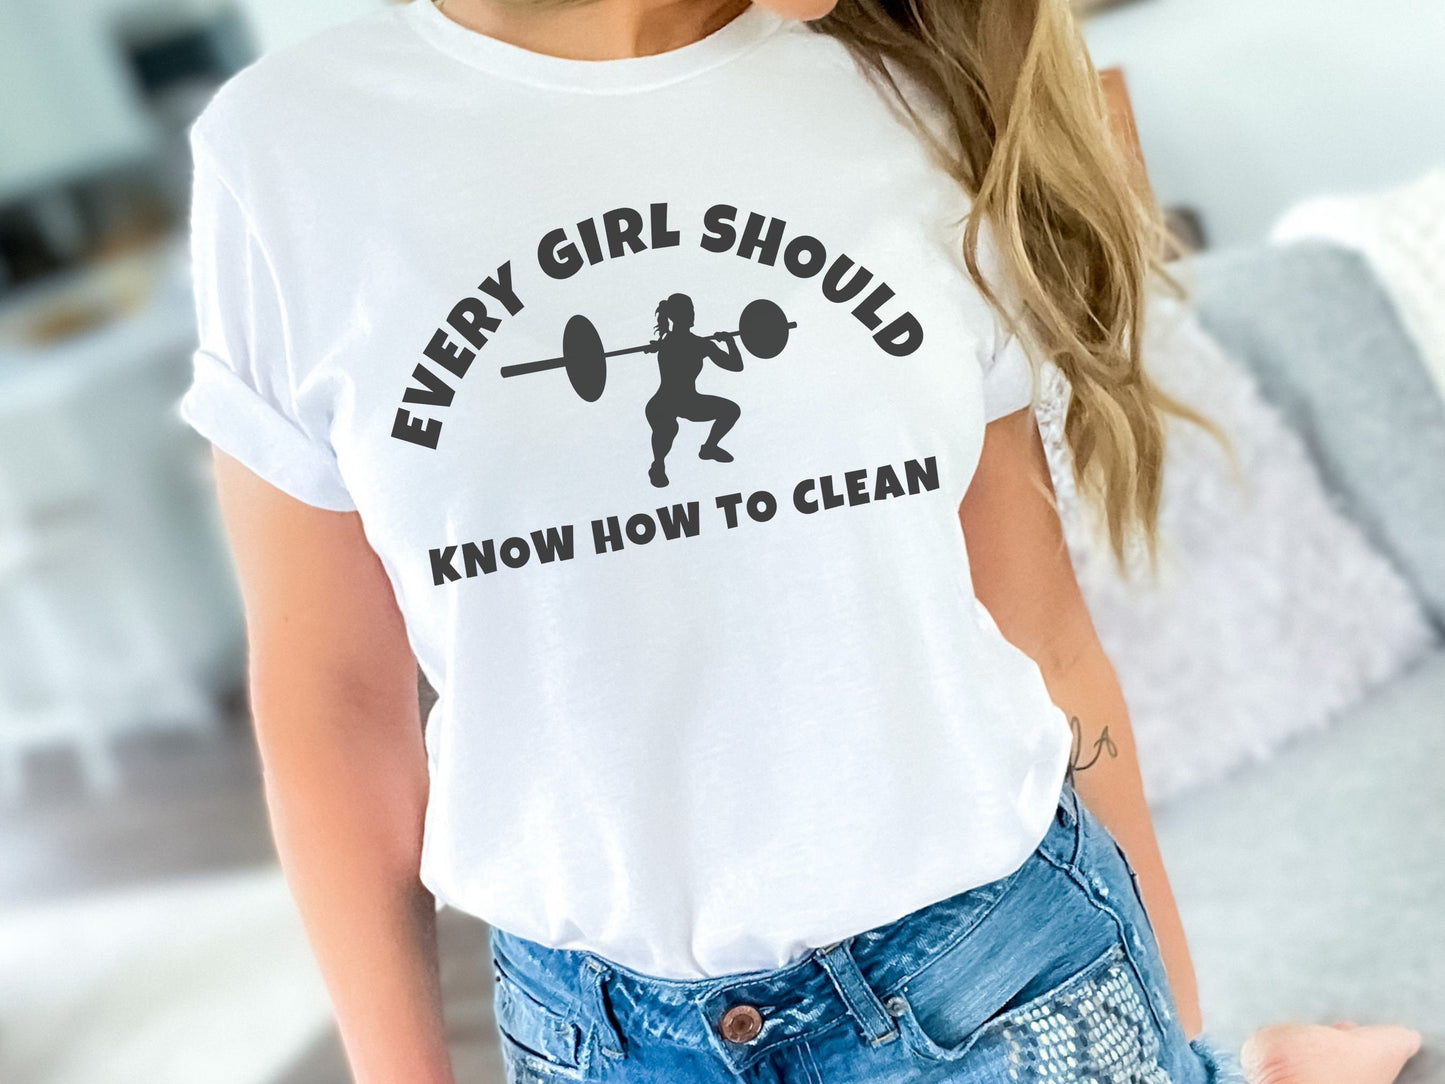 Every Girl Should Know How to Clean Workout Shirt